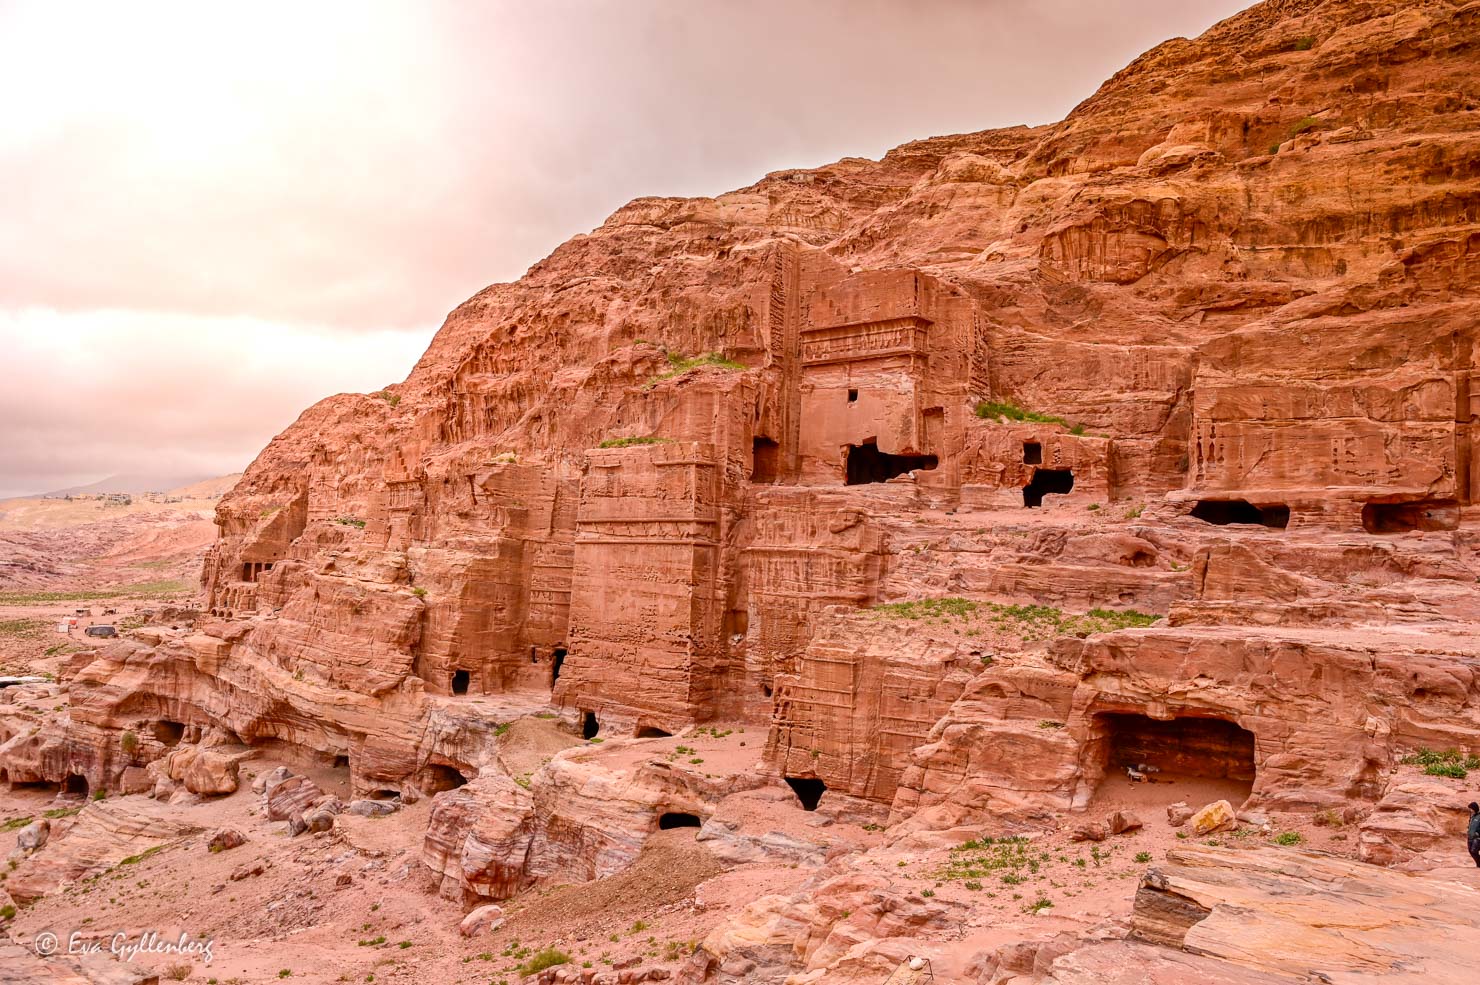 Sandstone rock wall with tombs in Petra